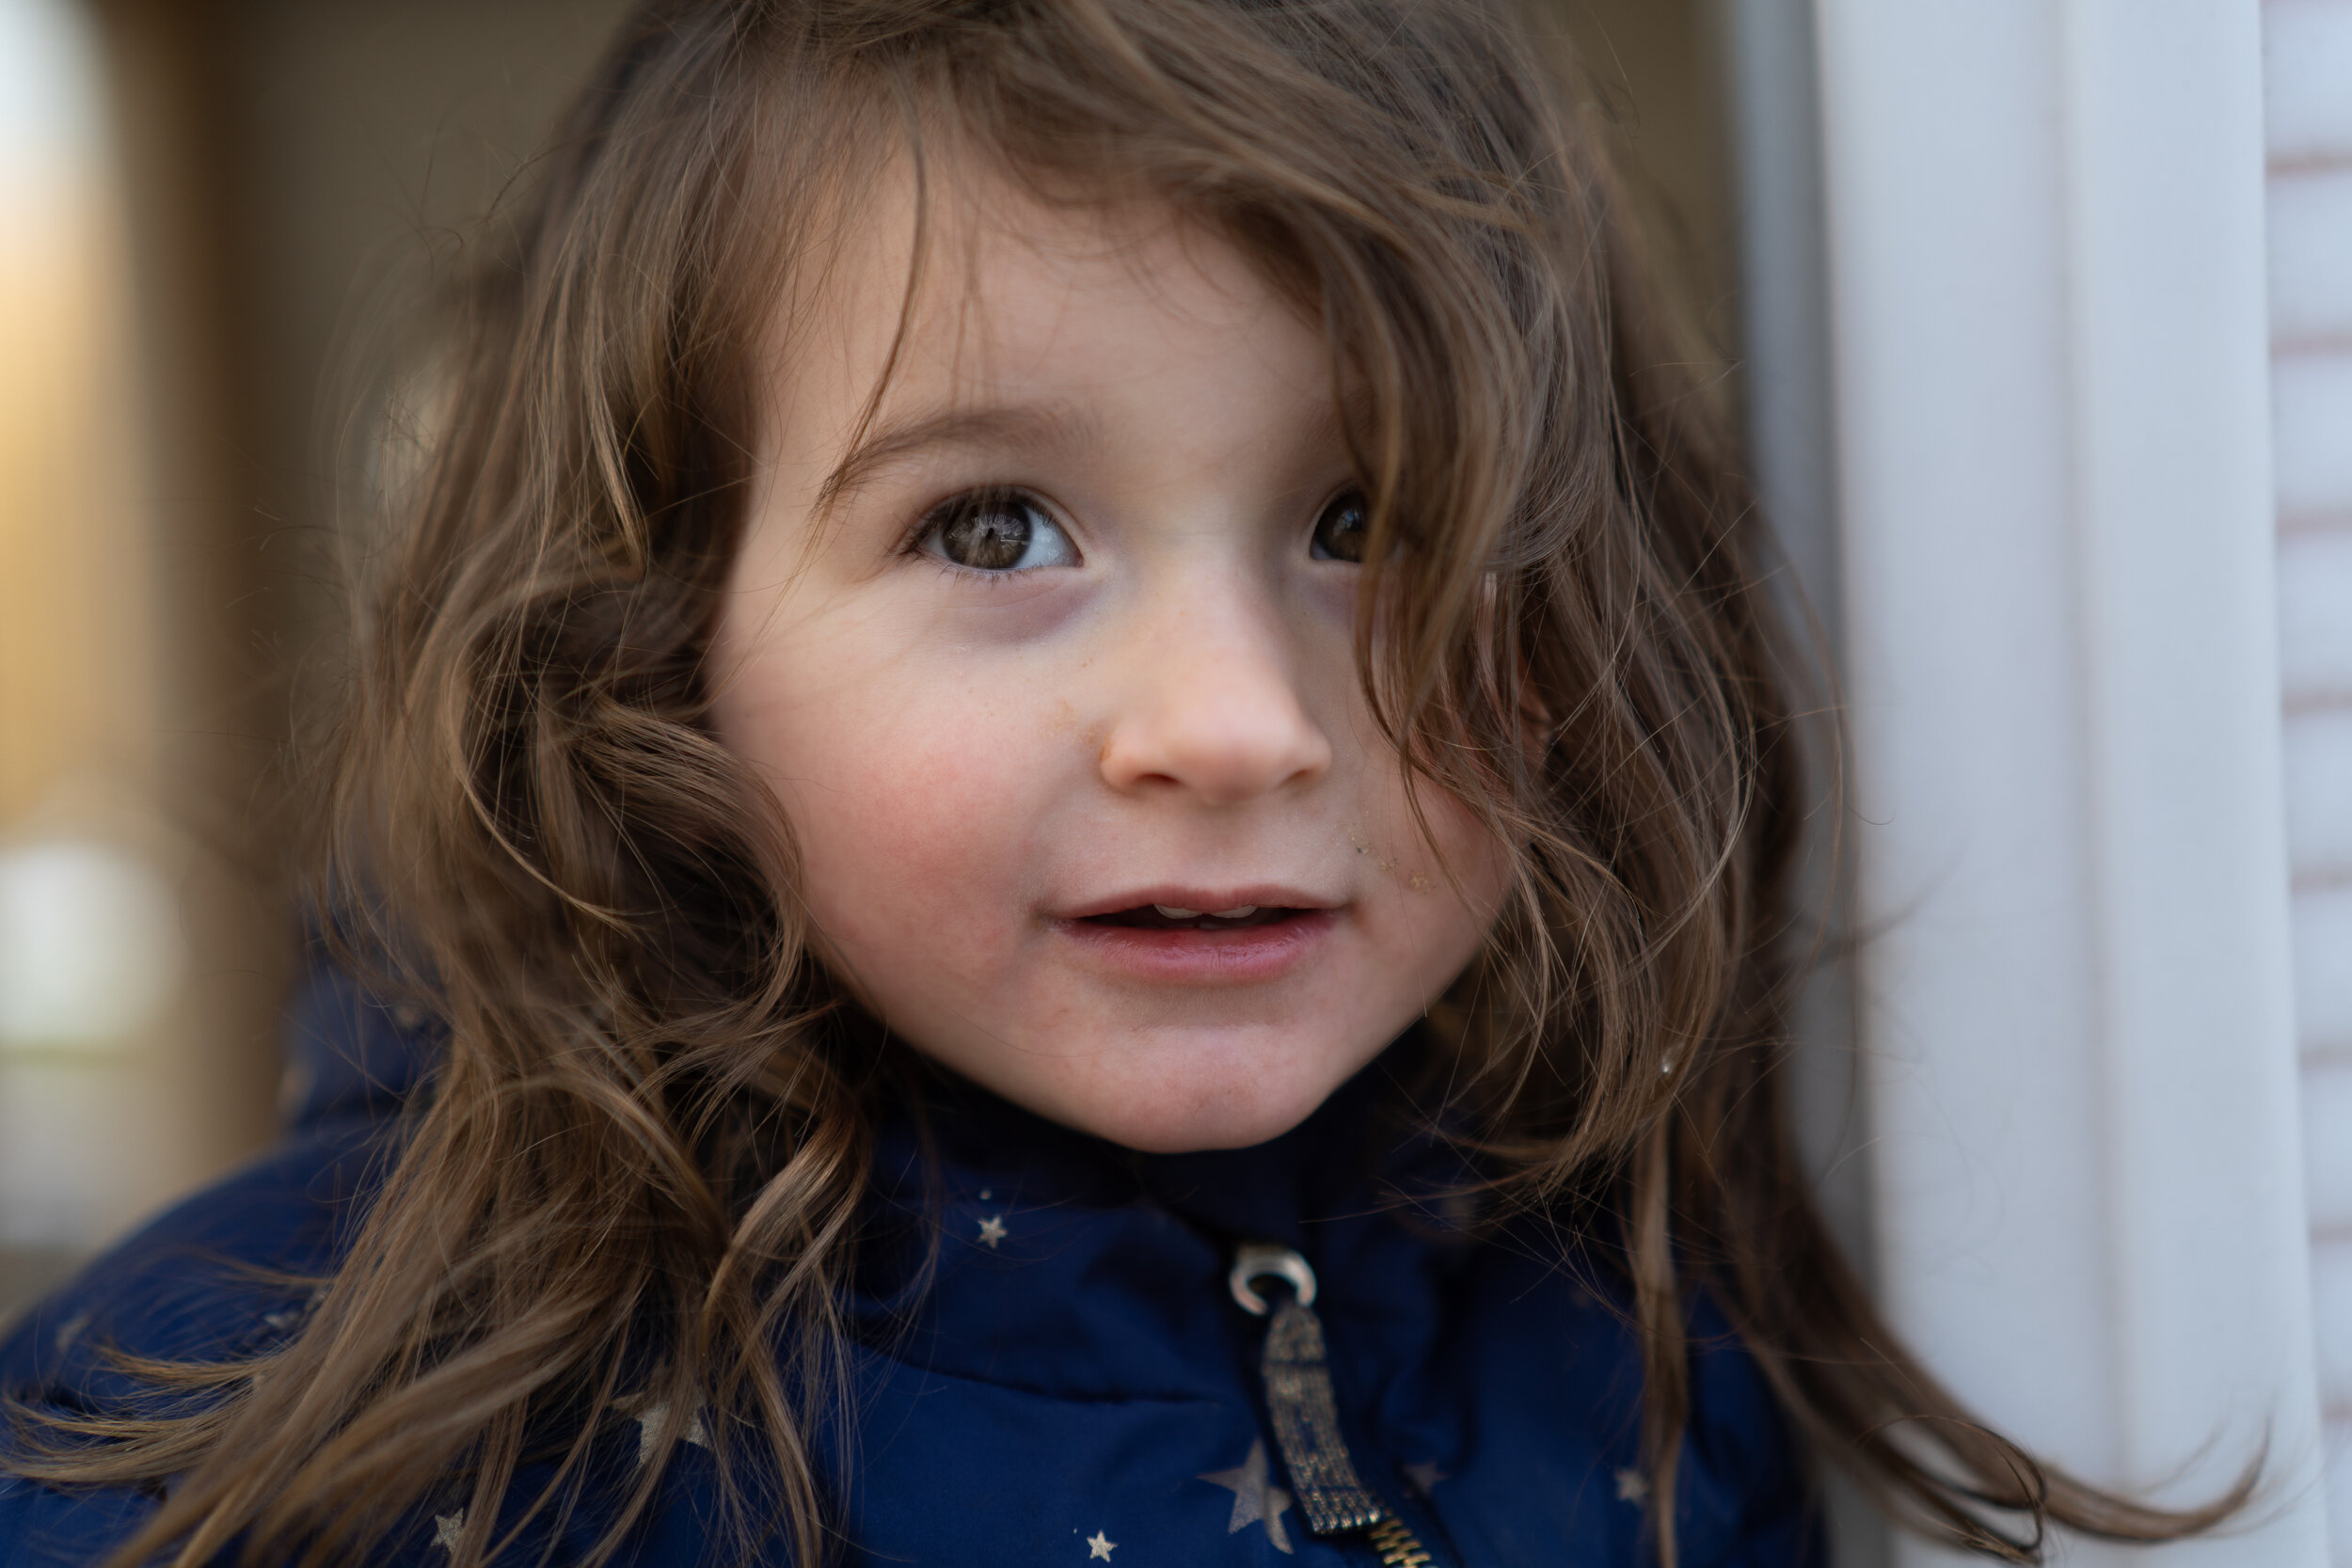 portrait of a little girl with brown hair and grey eyes in a blue jacket with gold stars looking off into the distance